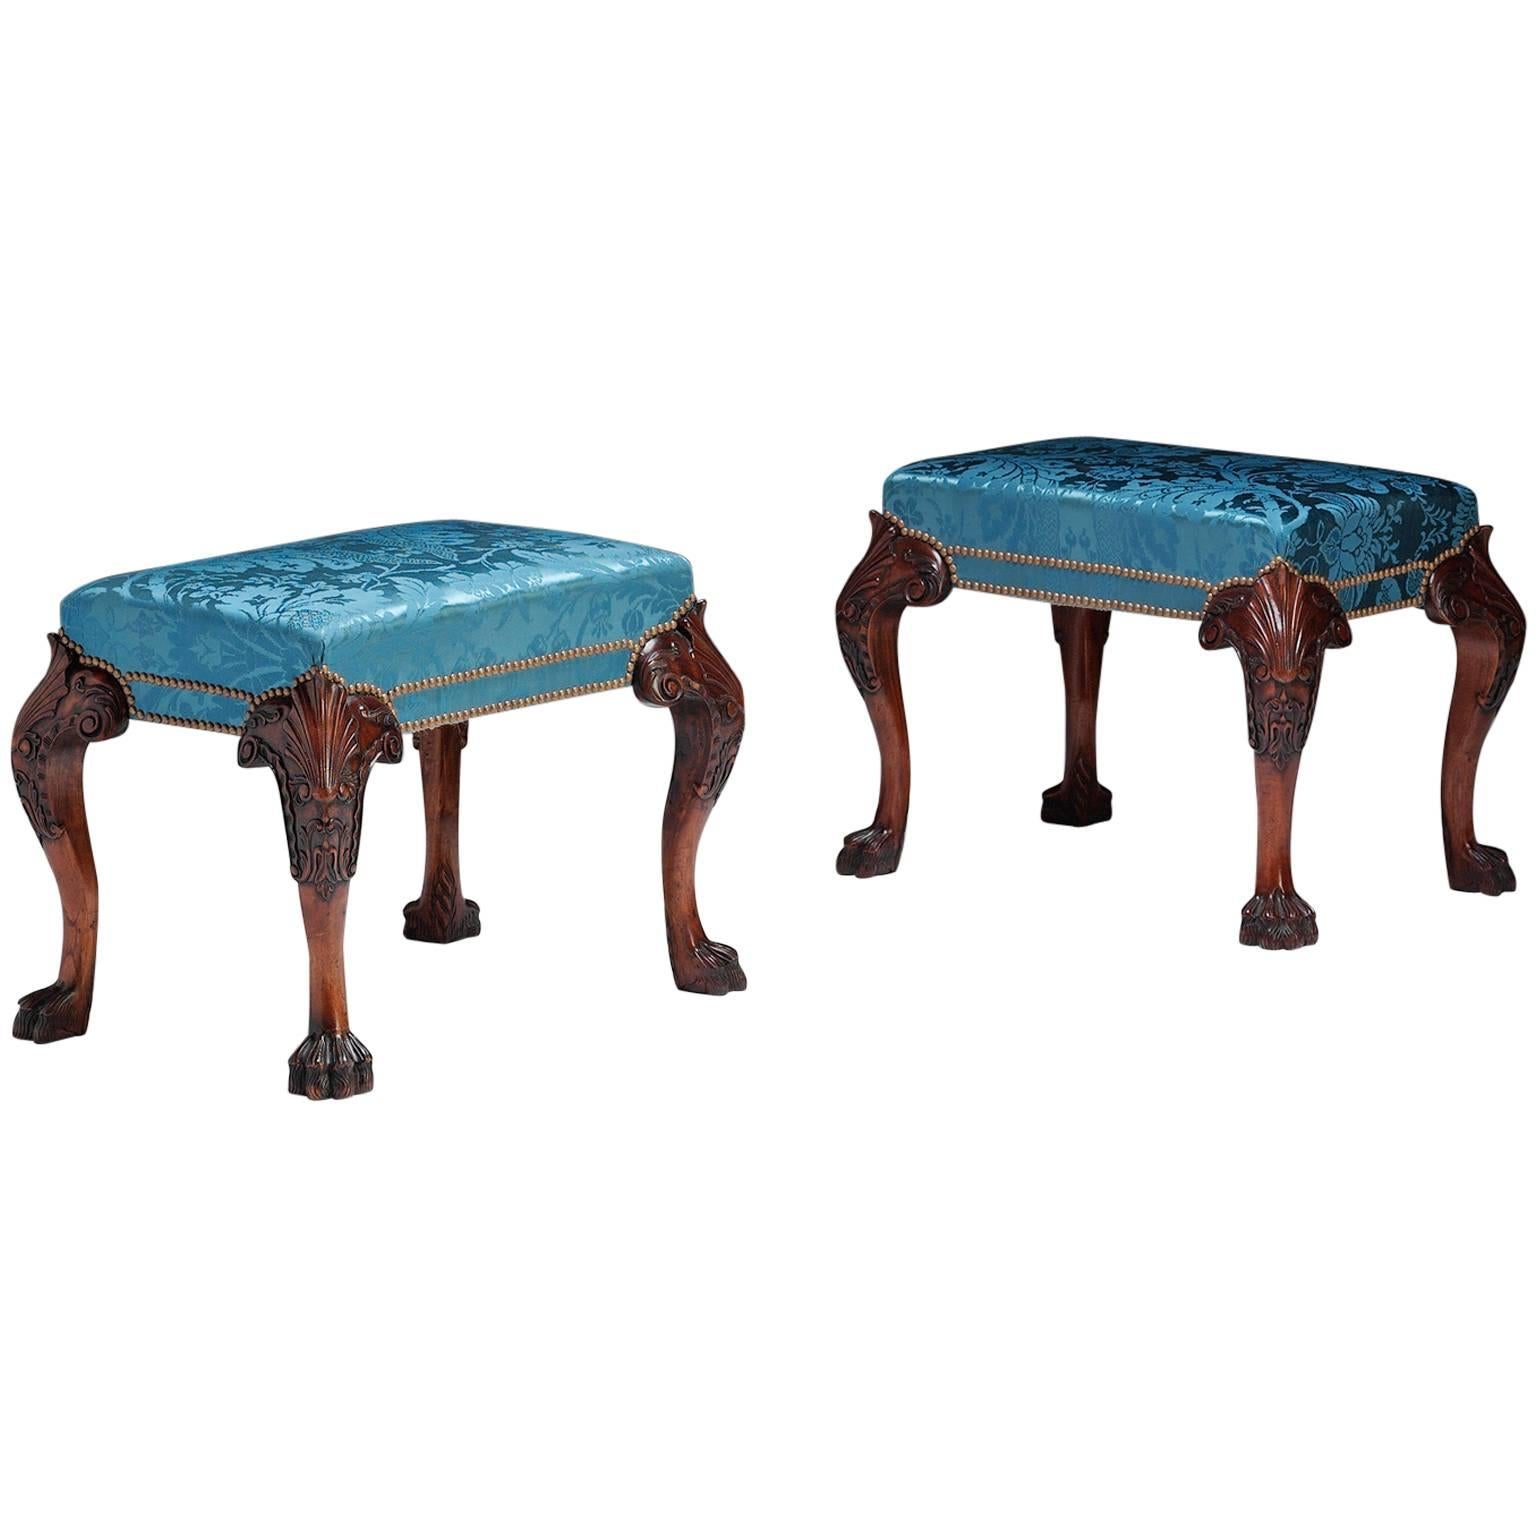 Pair of Claw Foot Stools in the style of Thomas Chippendale